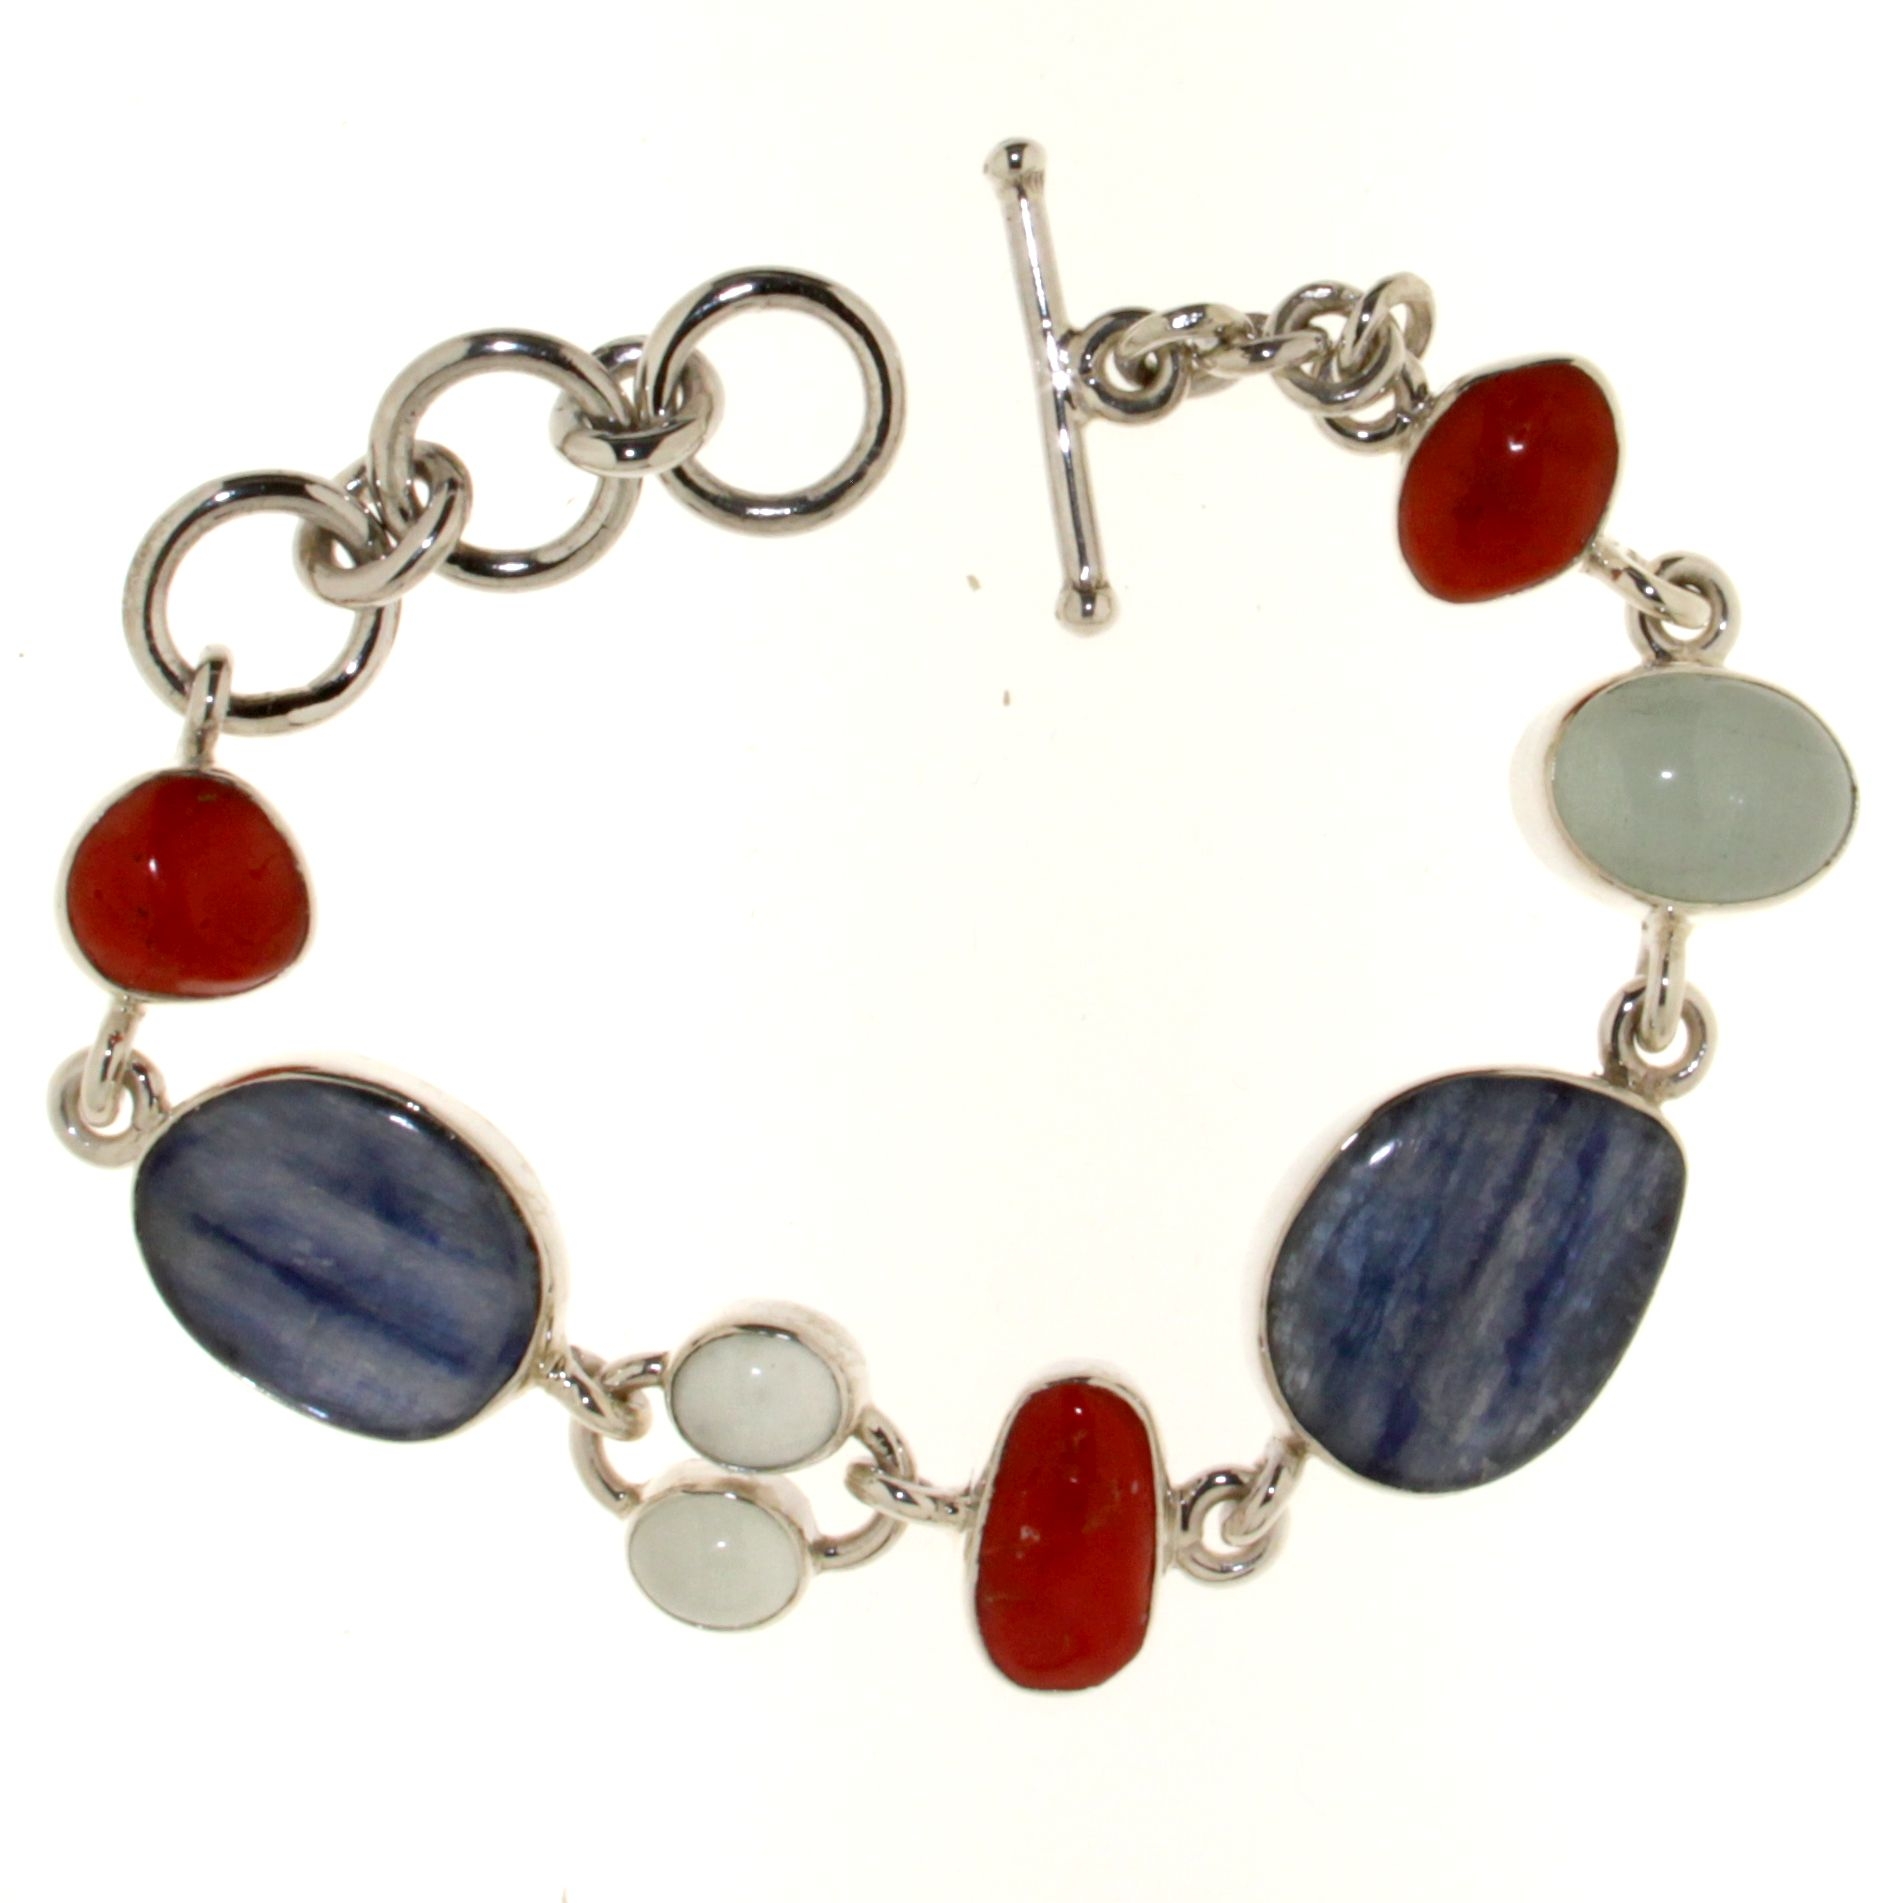 Bracelet with Red Coral of the Mediterranean Sea,